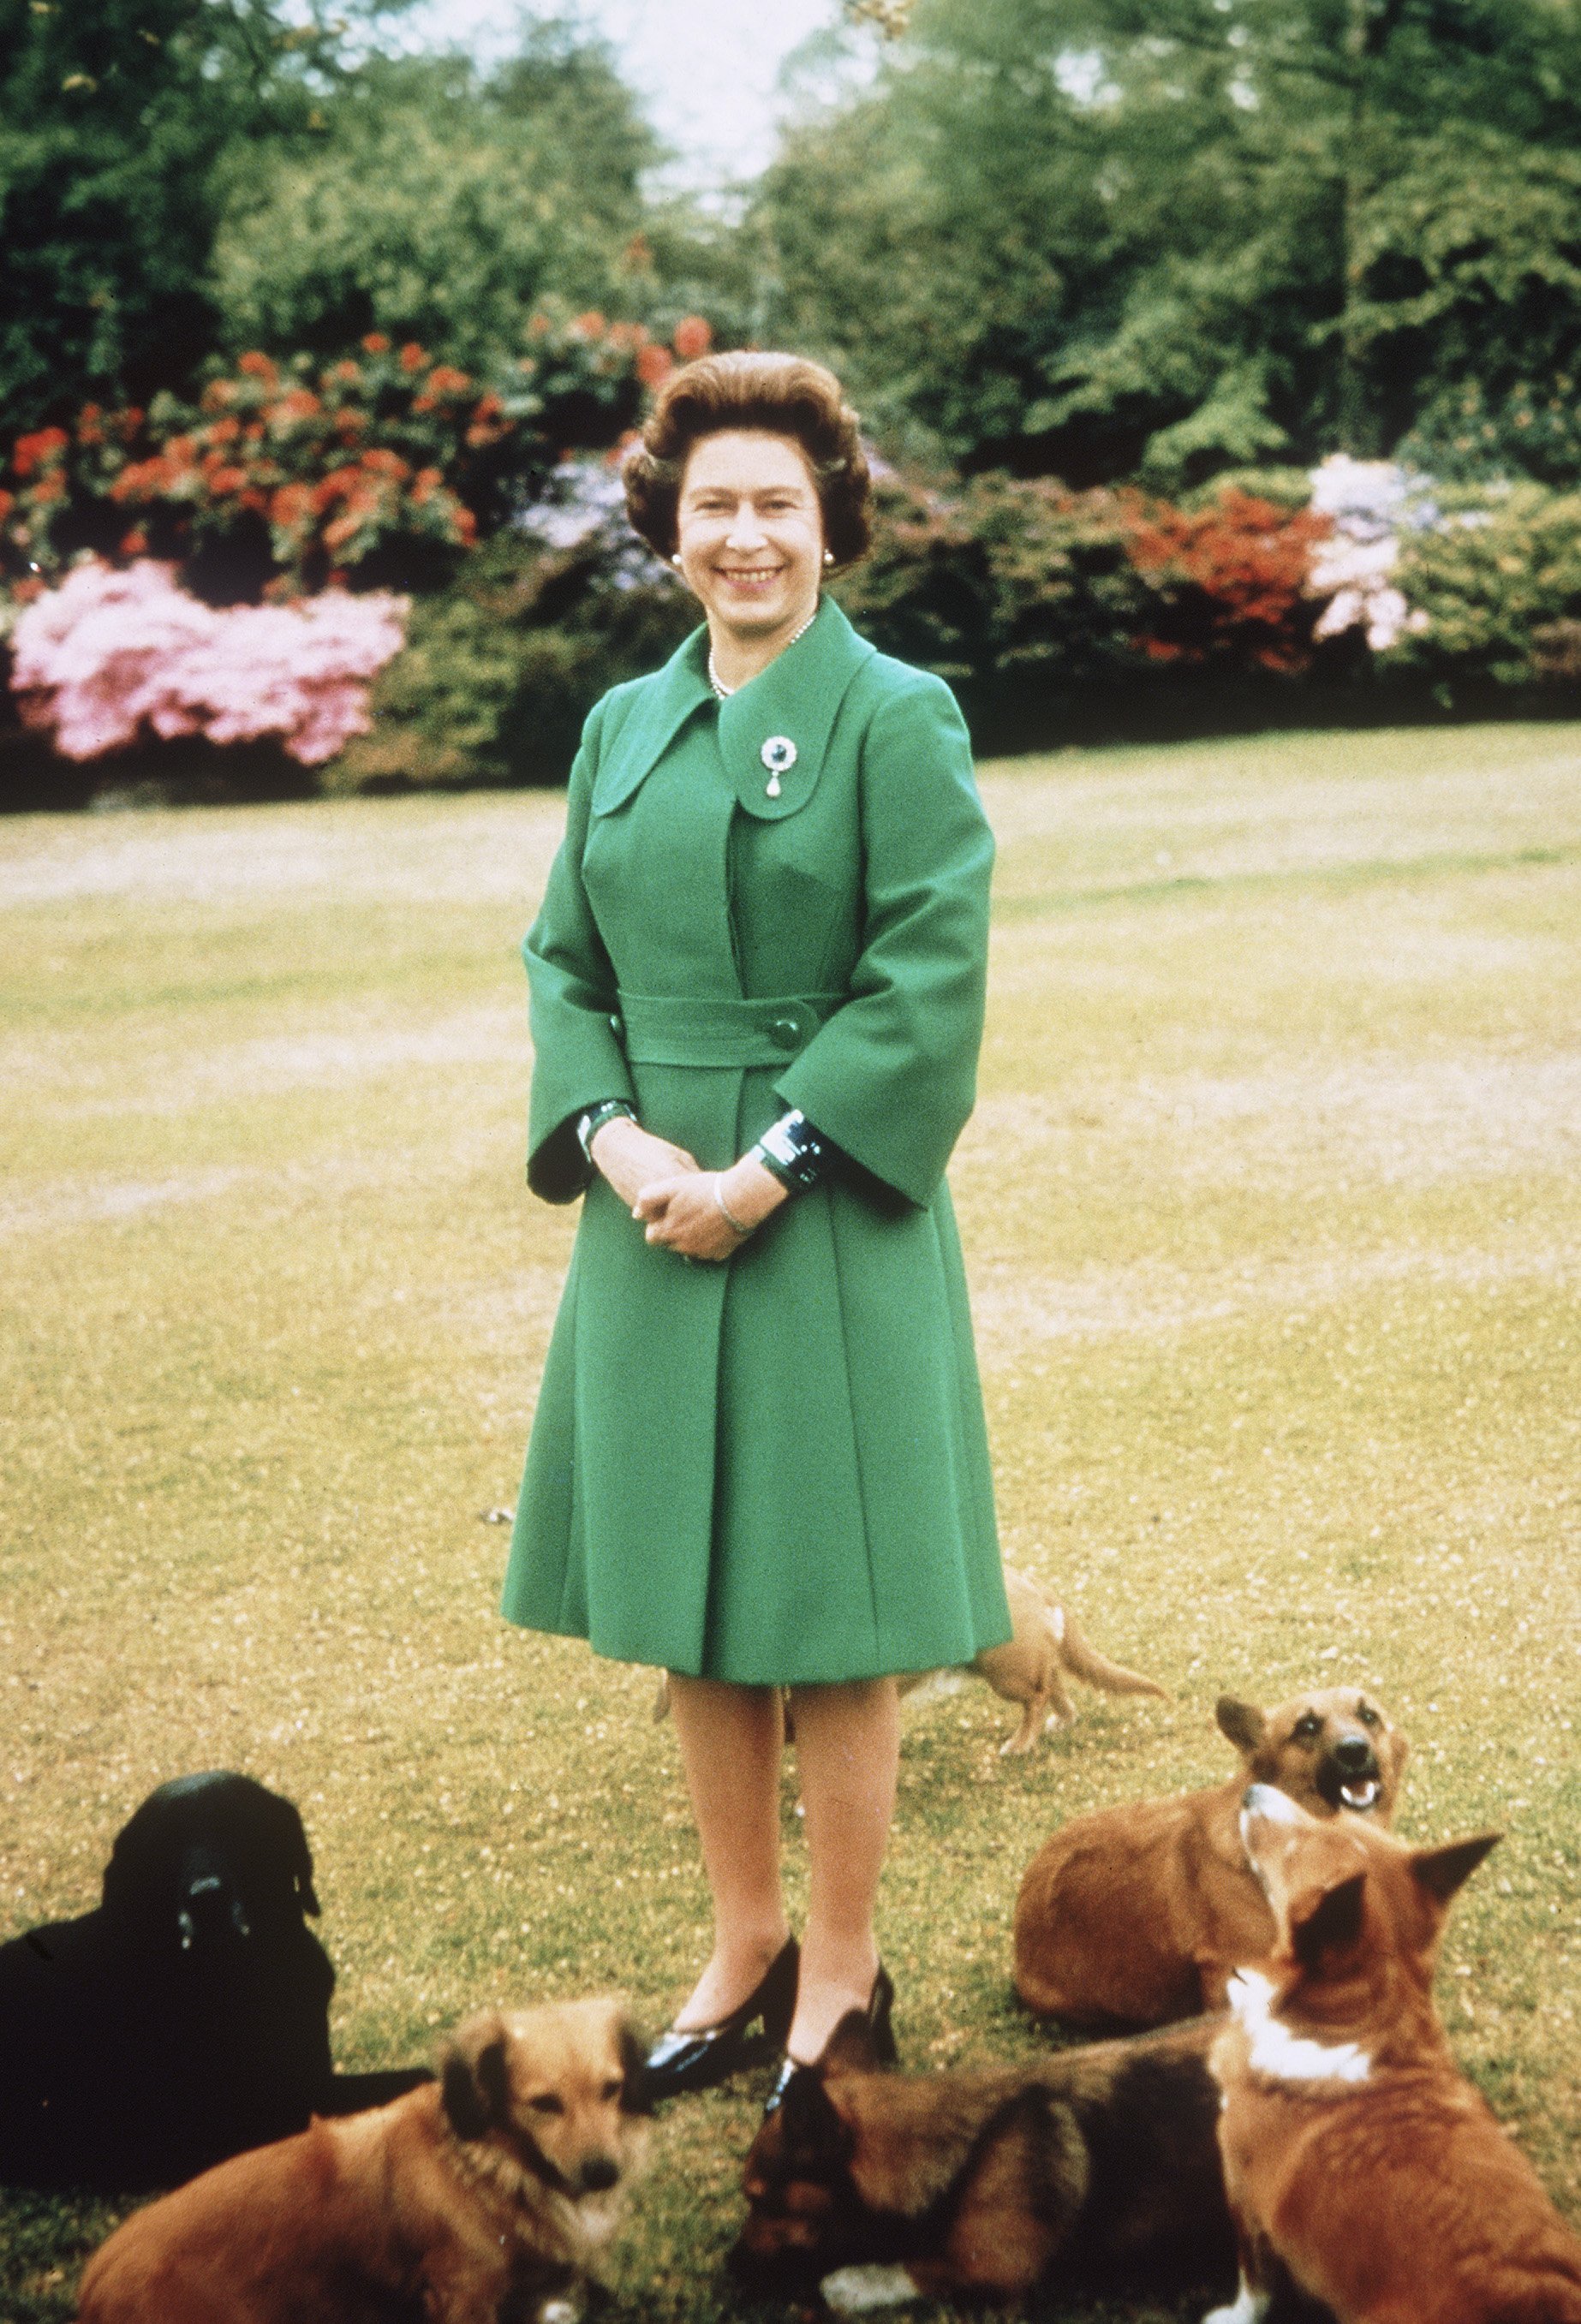 Queen Elizabeth II relaxes at Sandringham with her corgis on an unspecified date. | Source: Getty Images.